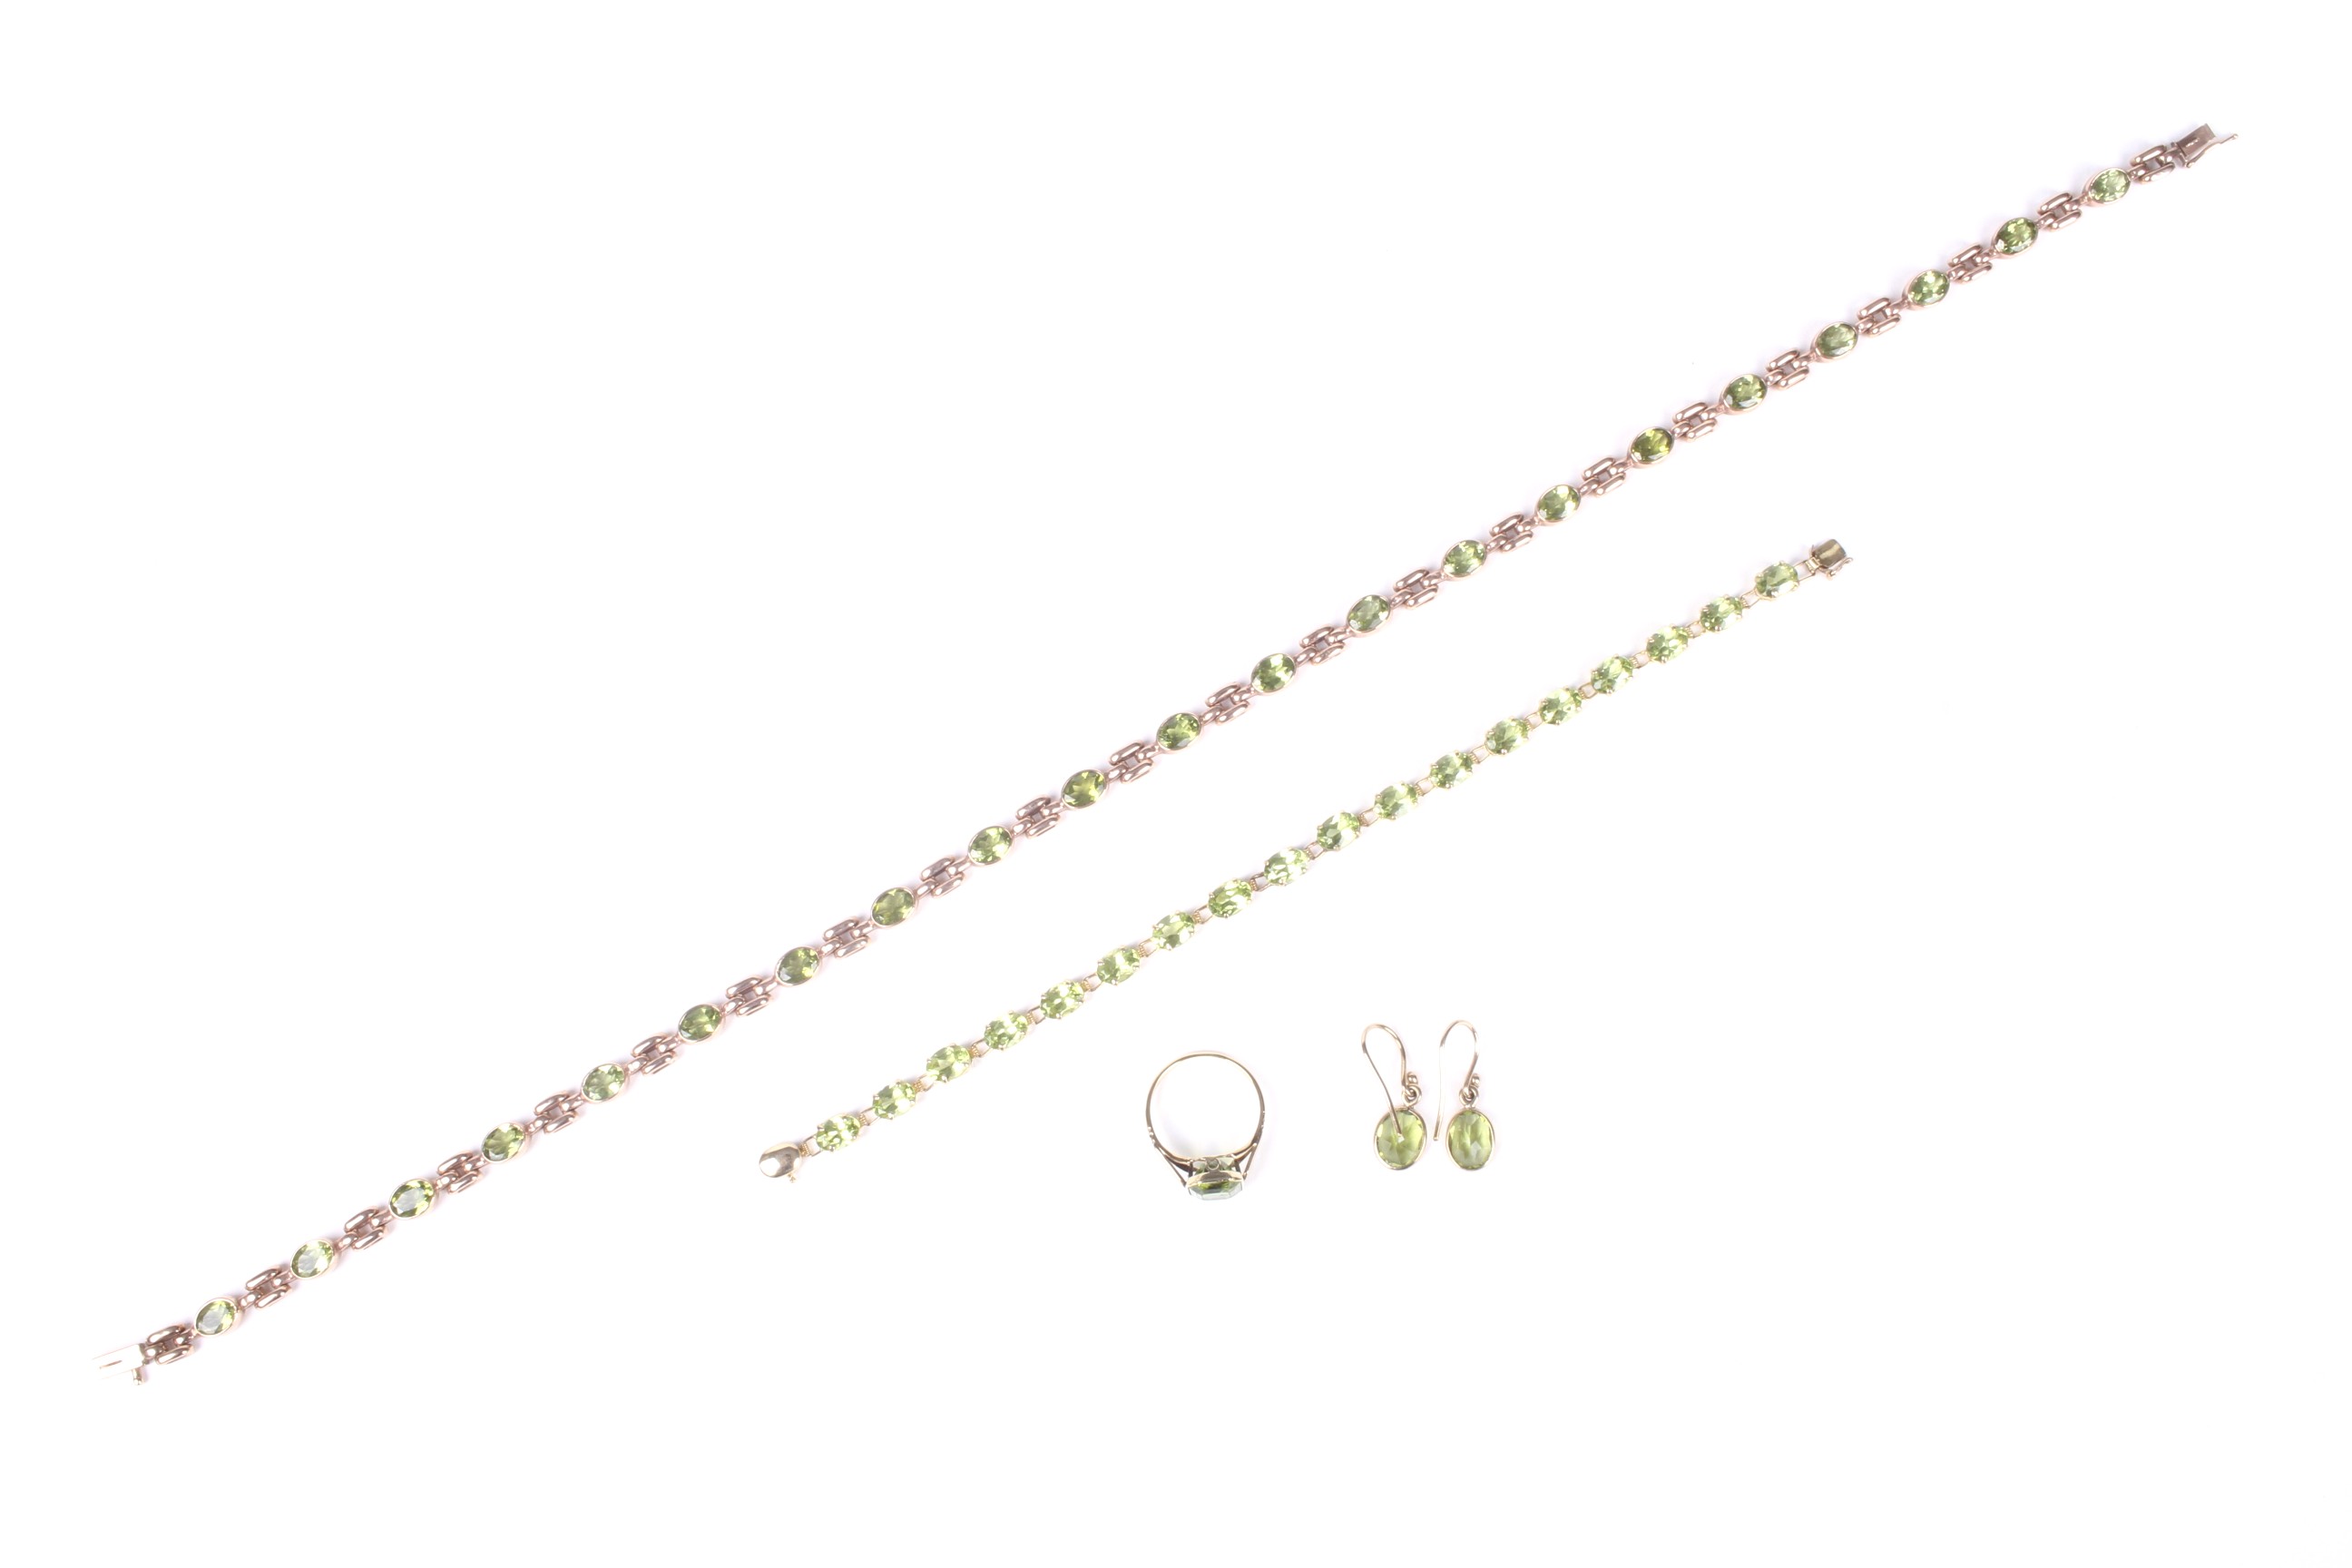 A peridot single stone ring, together with a pair of earrings, a bracelet and a necklace.